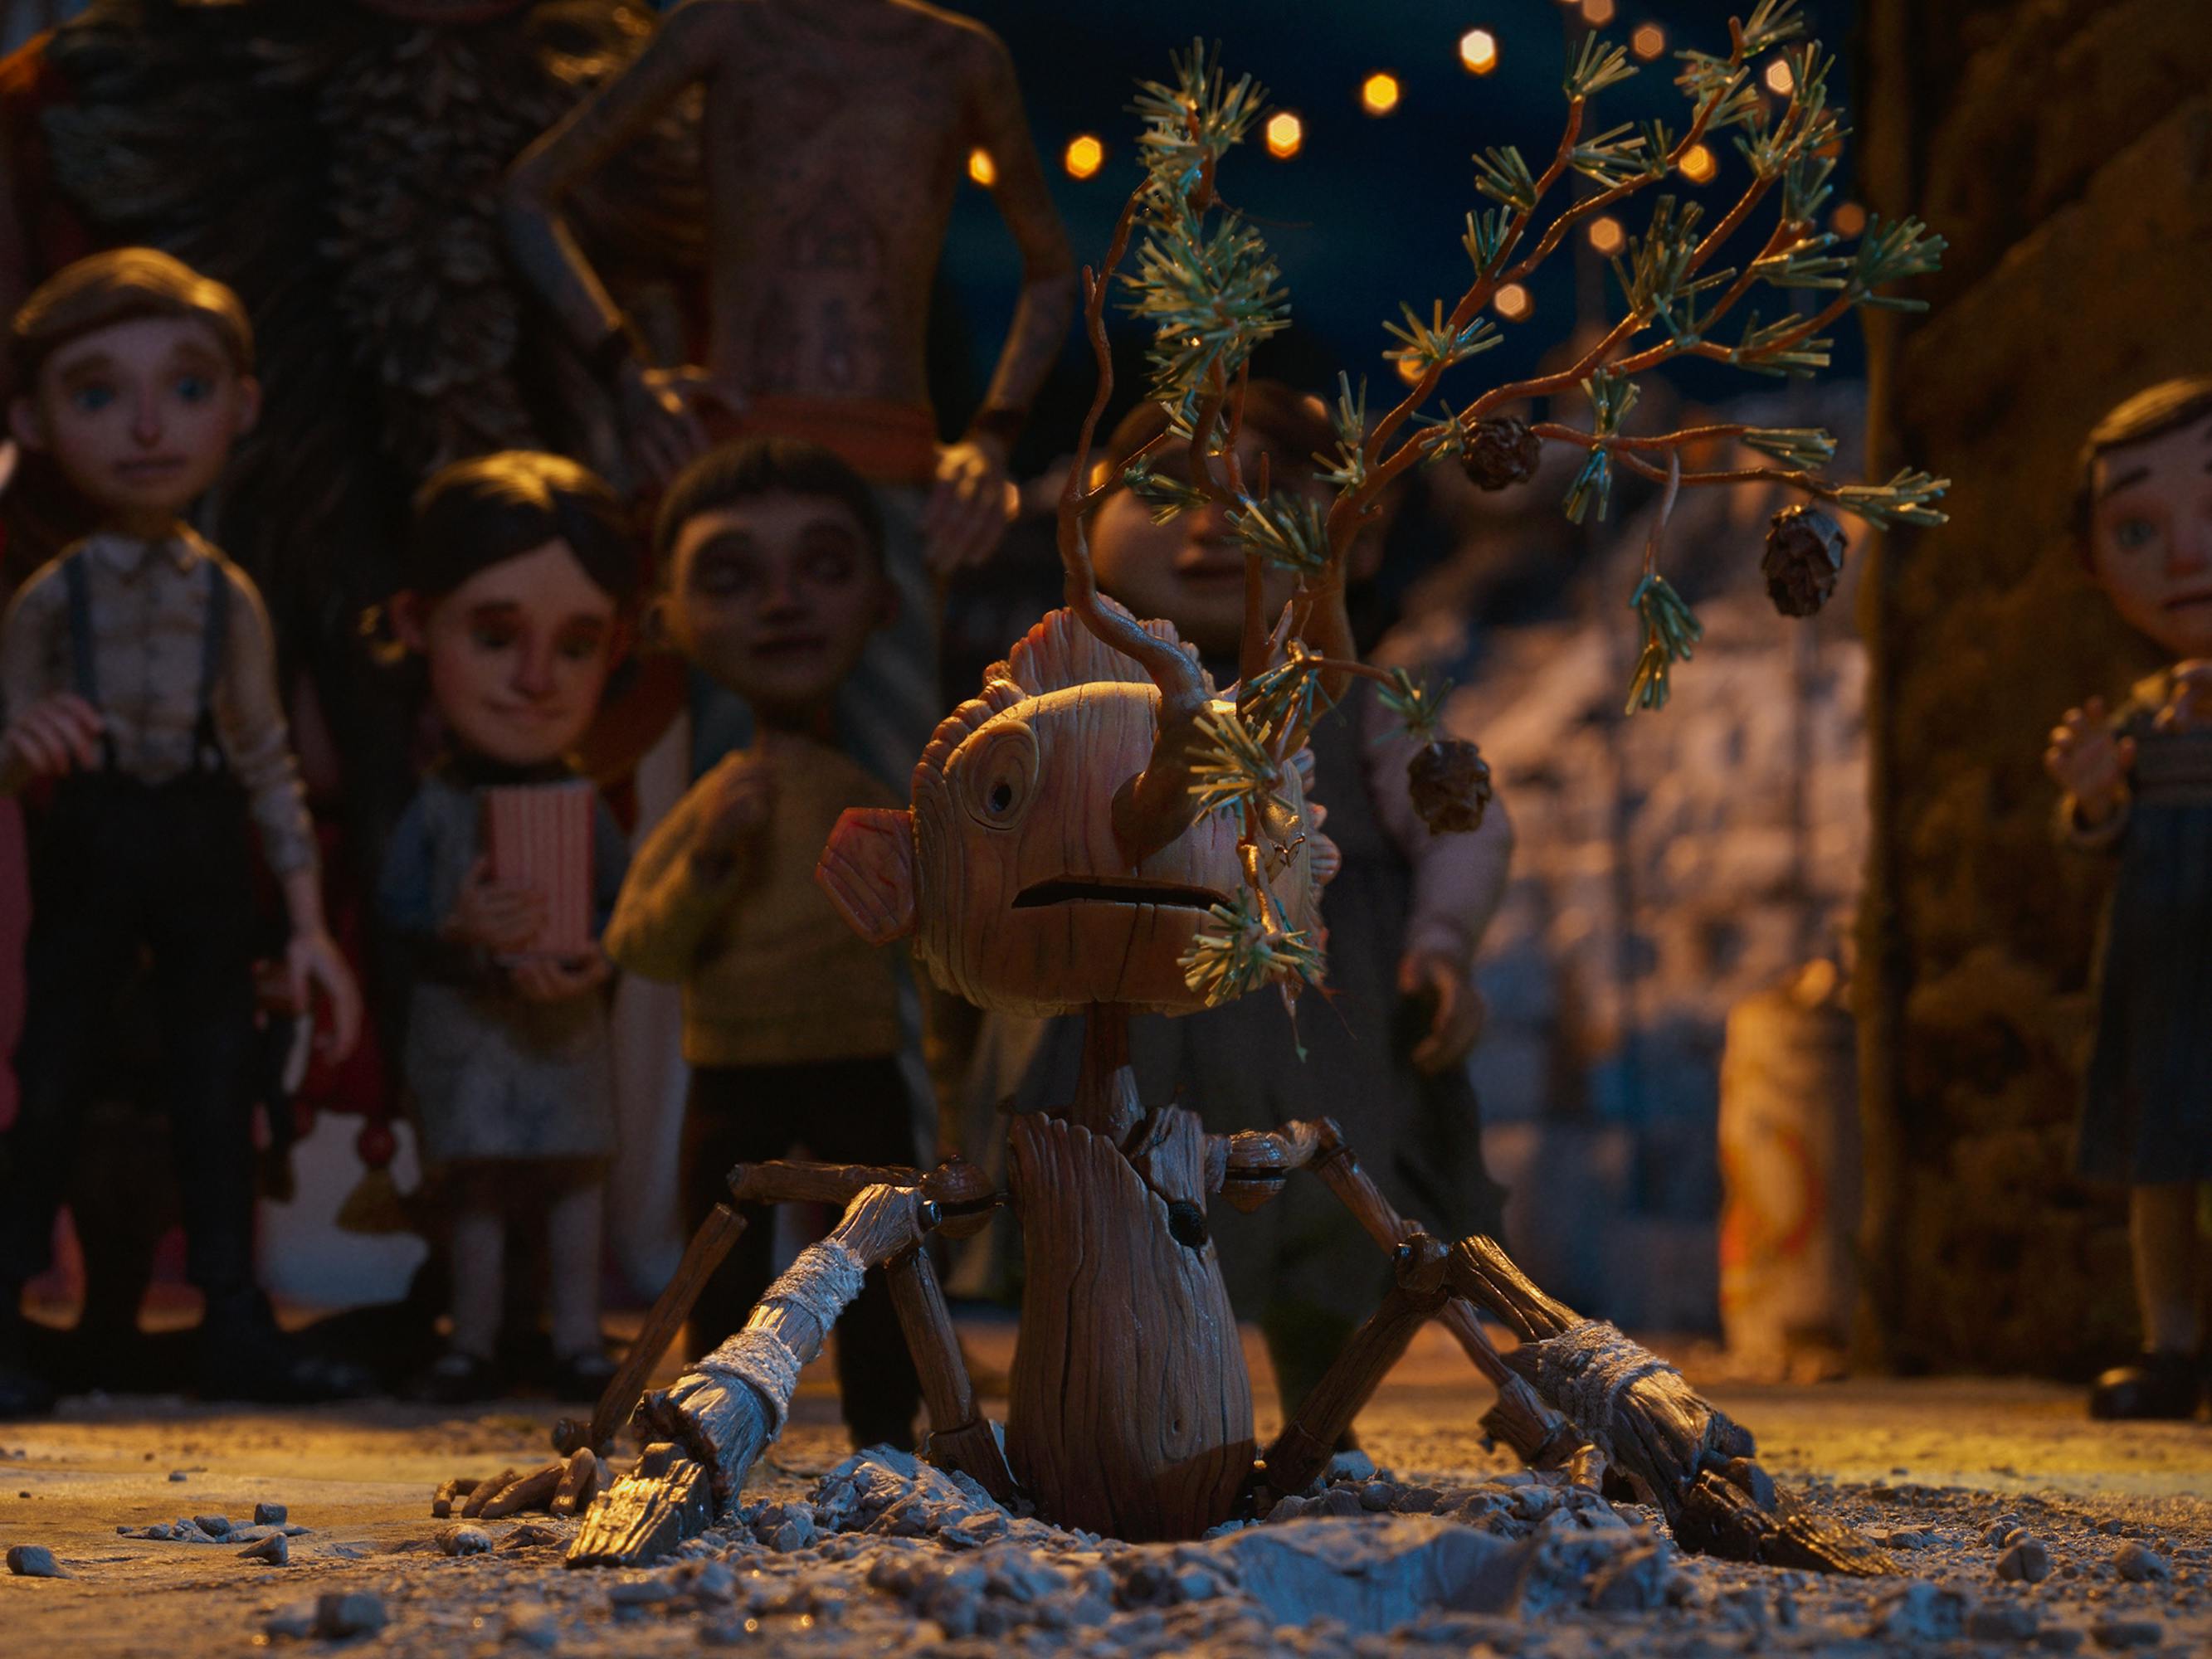 Pinocchio’s (Gregory Mann) nose grows into a small tree in front of a group of kids.